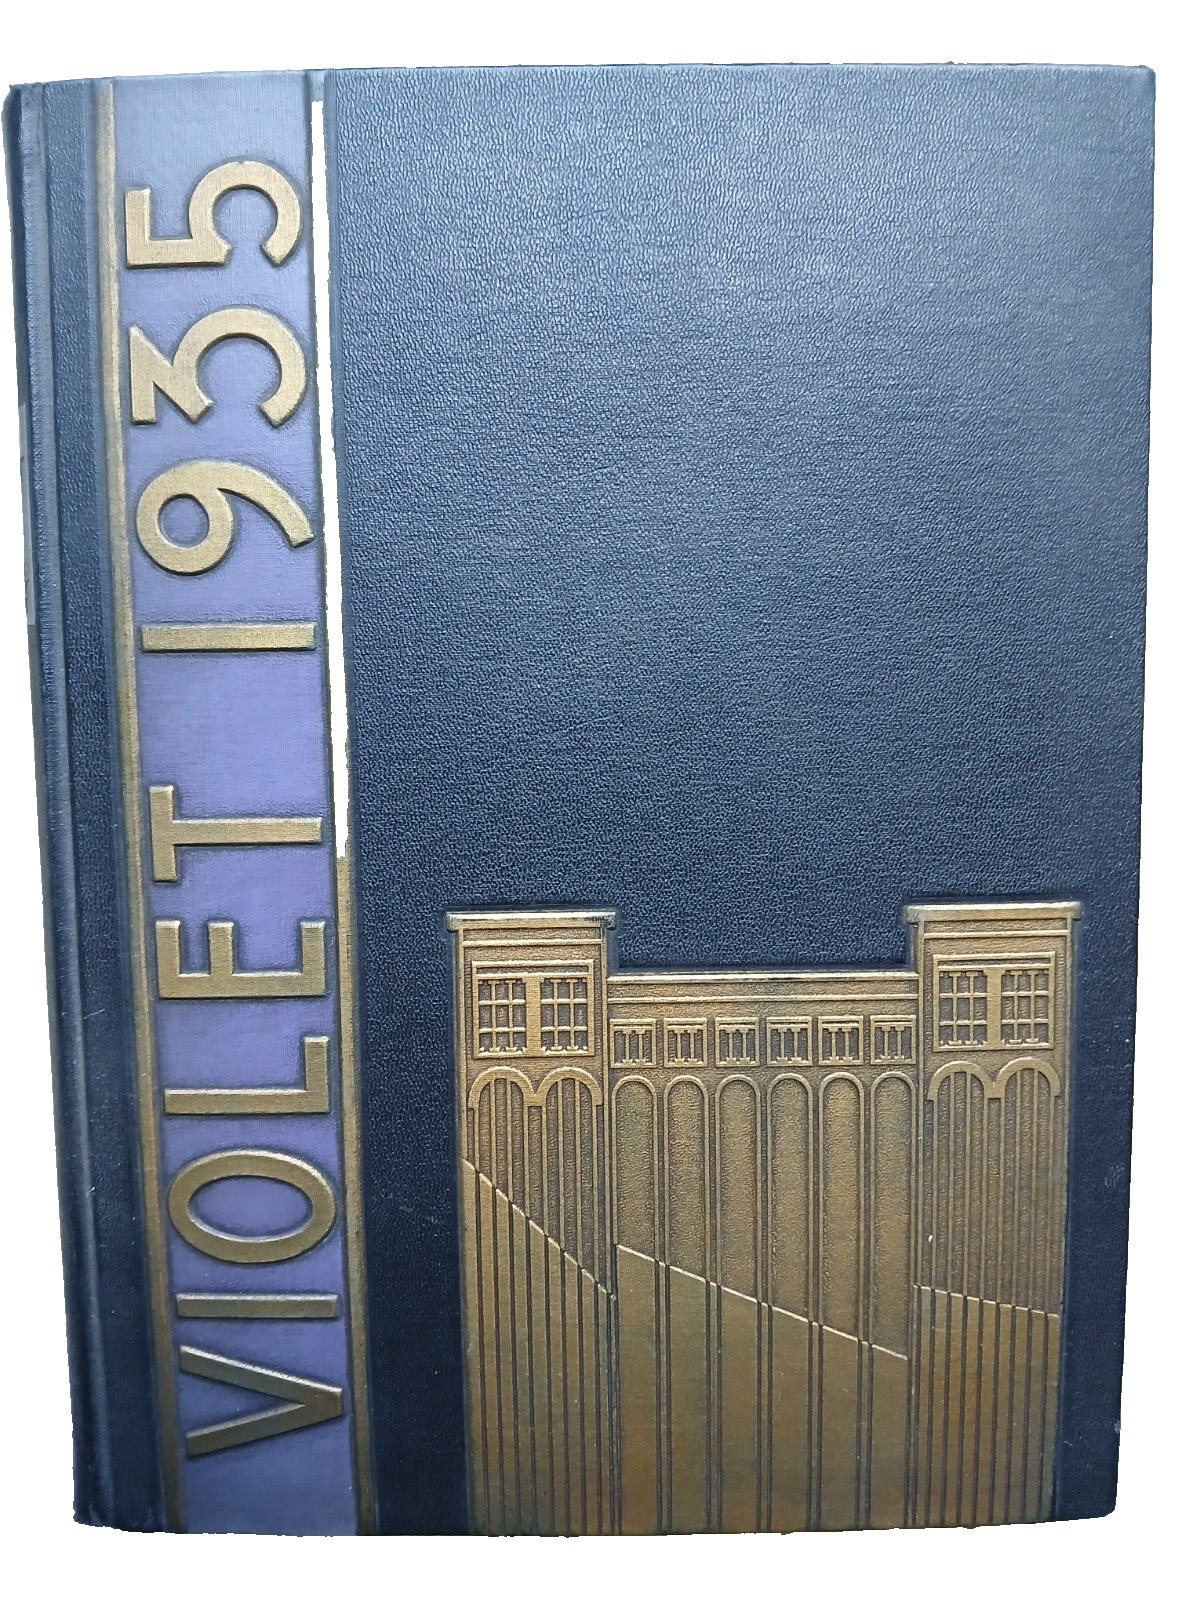 Violet 1935 School of Commerce Accounts and Finance NY University Yearbook